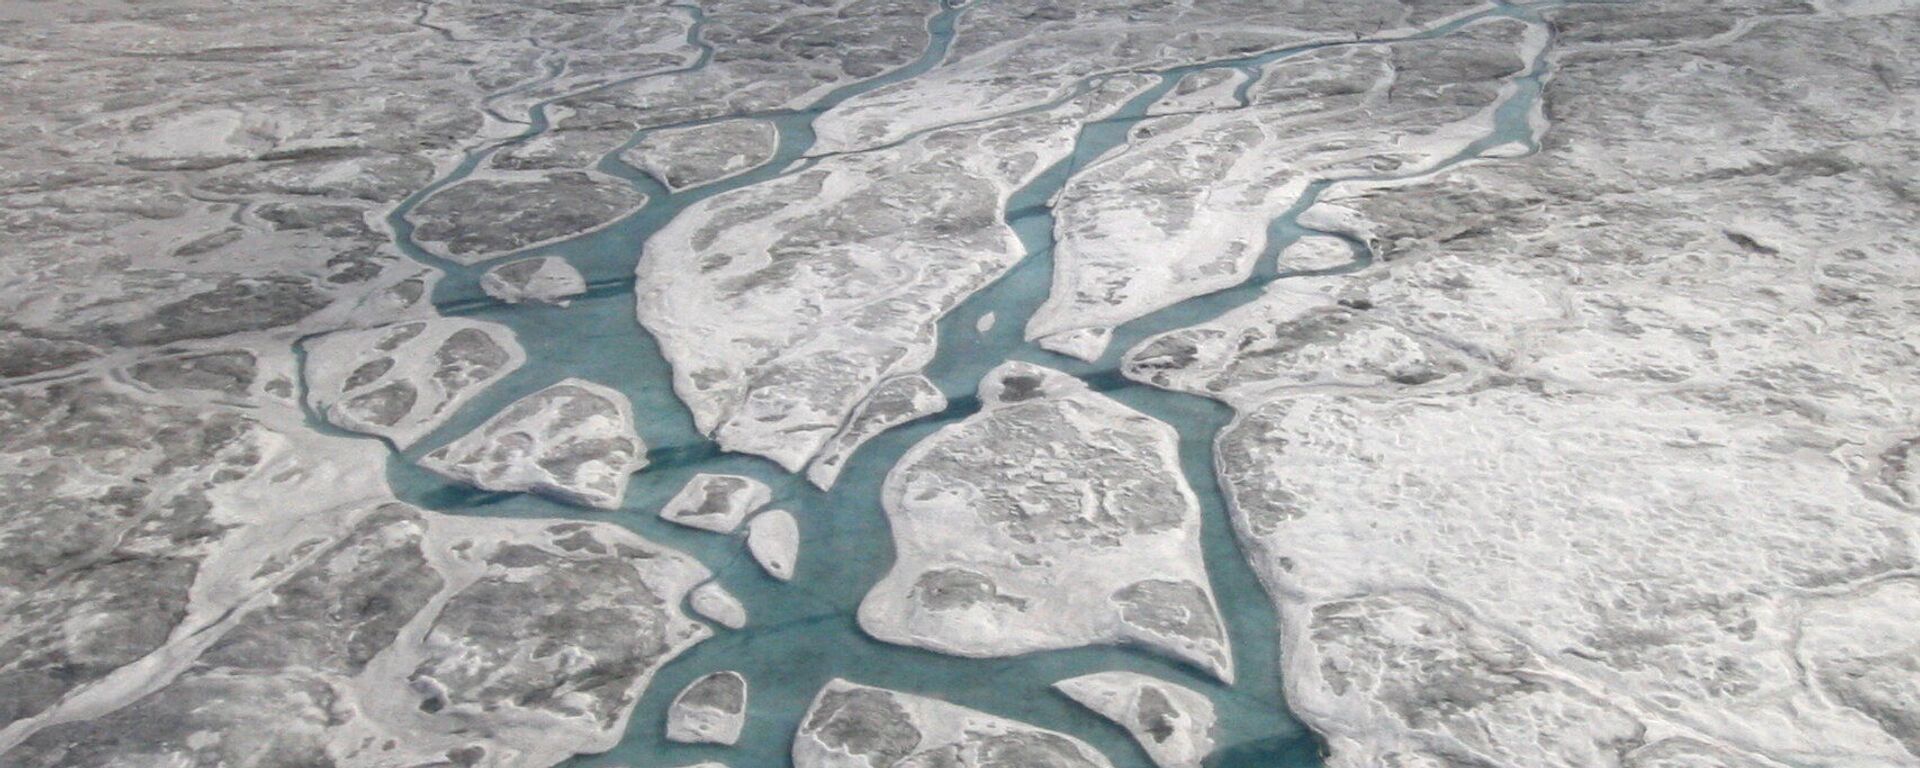 Researchers have discovered 56 previously uncharted subglacial lakes beneath the Greenland Ice Sheet bringing the total known number of lakes to 60. Although these lakes are typically smaller than similar lakes in Antarctica, their discovery demonstrates that lakes beneath the Greenland Ice Sheet are much more common than previously thought - Sputnik International, 1920, 11.06.2022